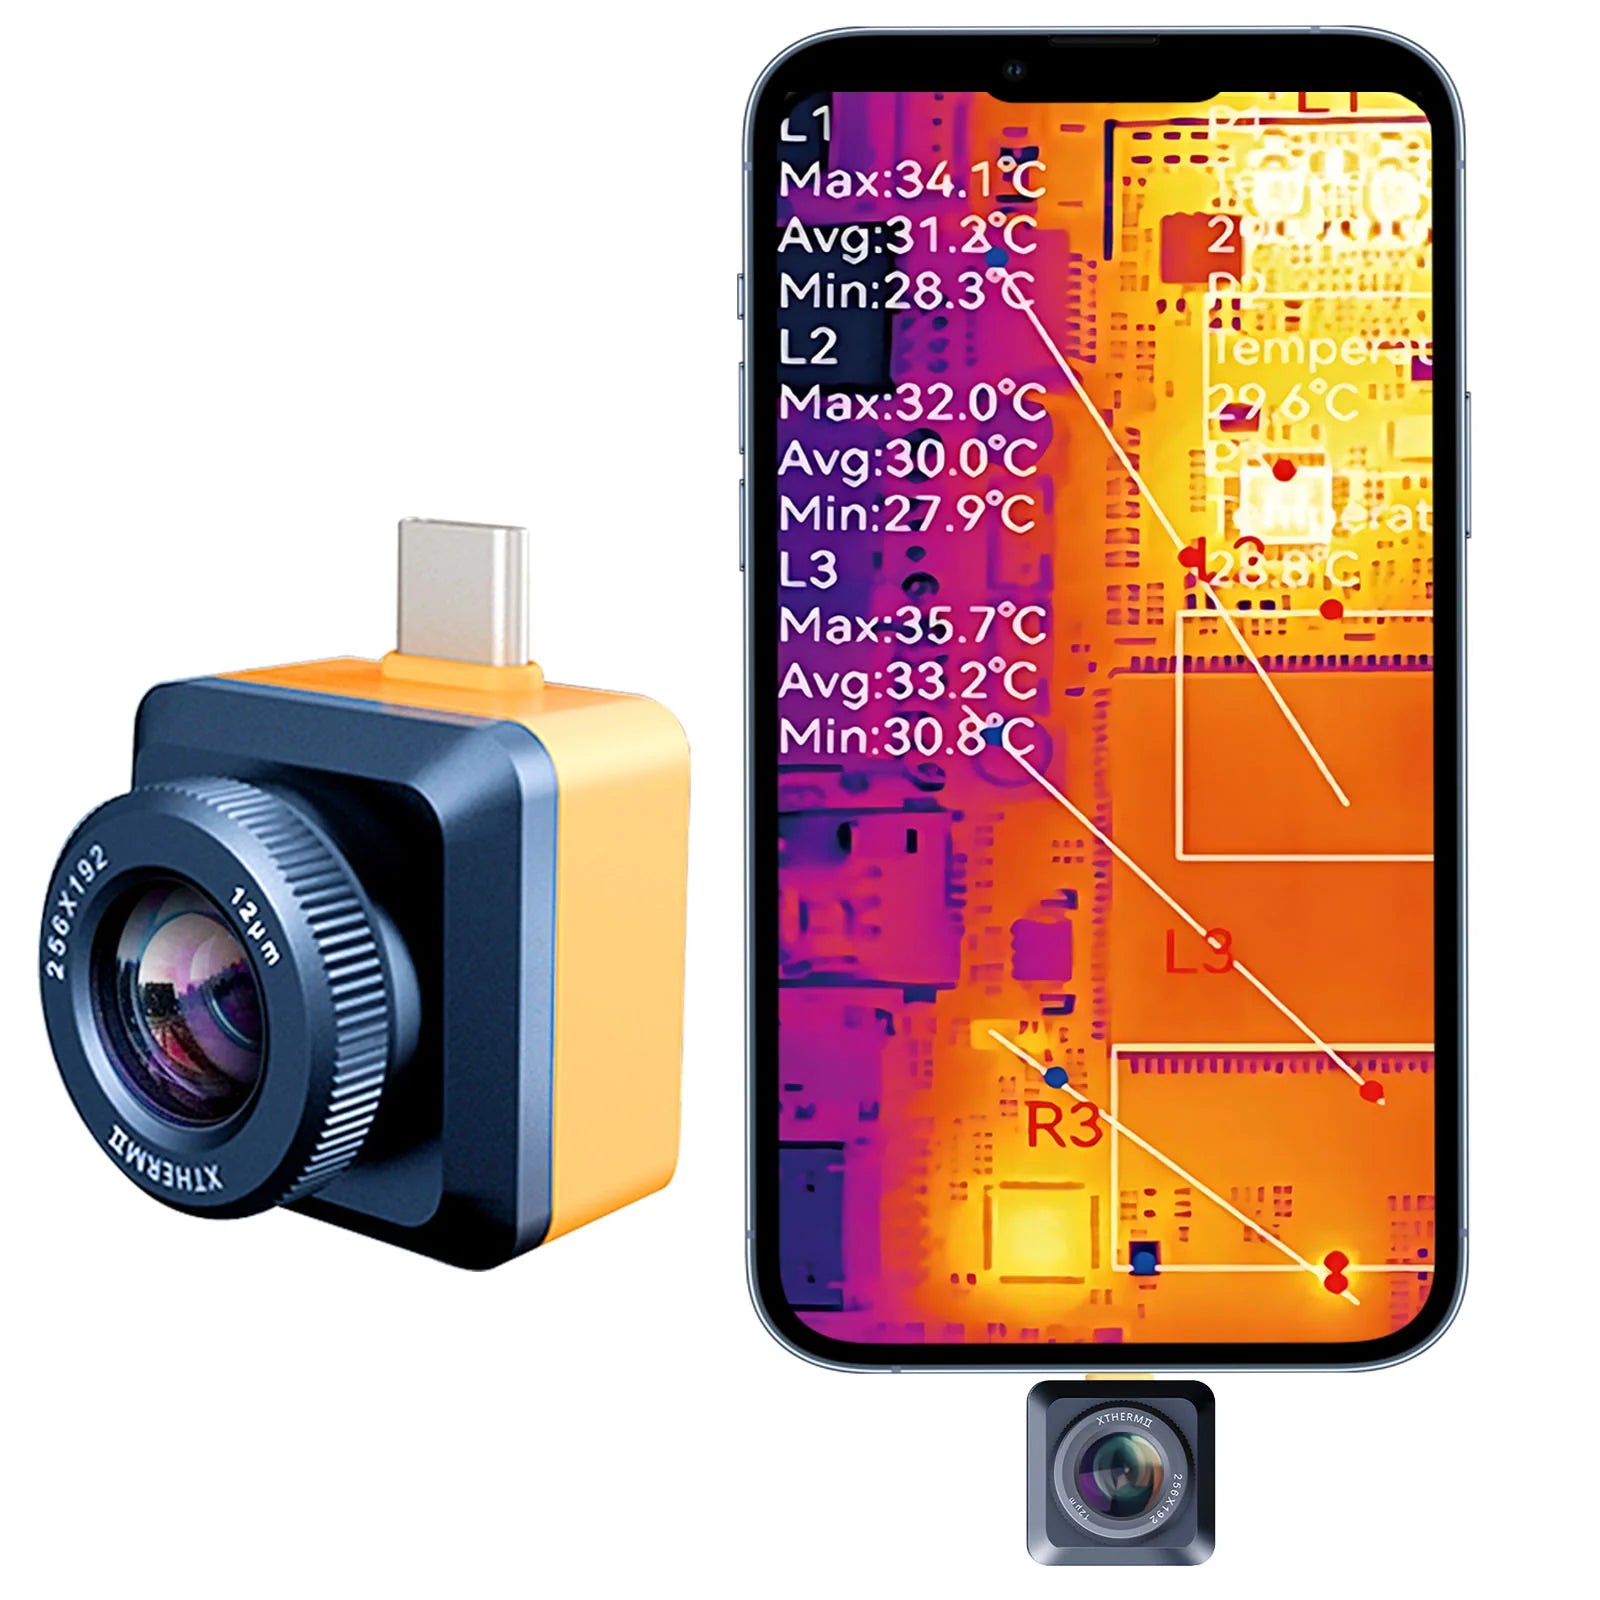 InfiRay P2 Pro and TOPDON TC001 Thermal Cameras Capsule Review